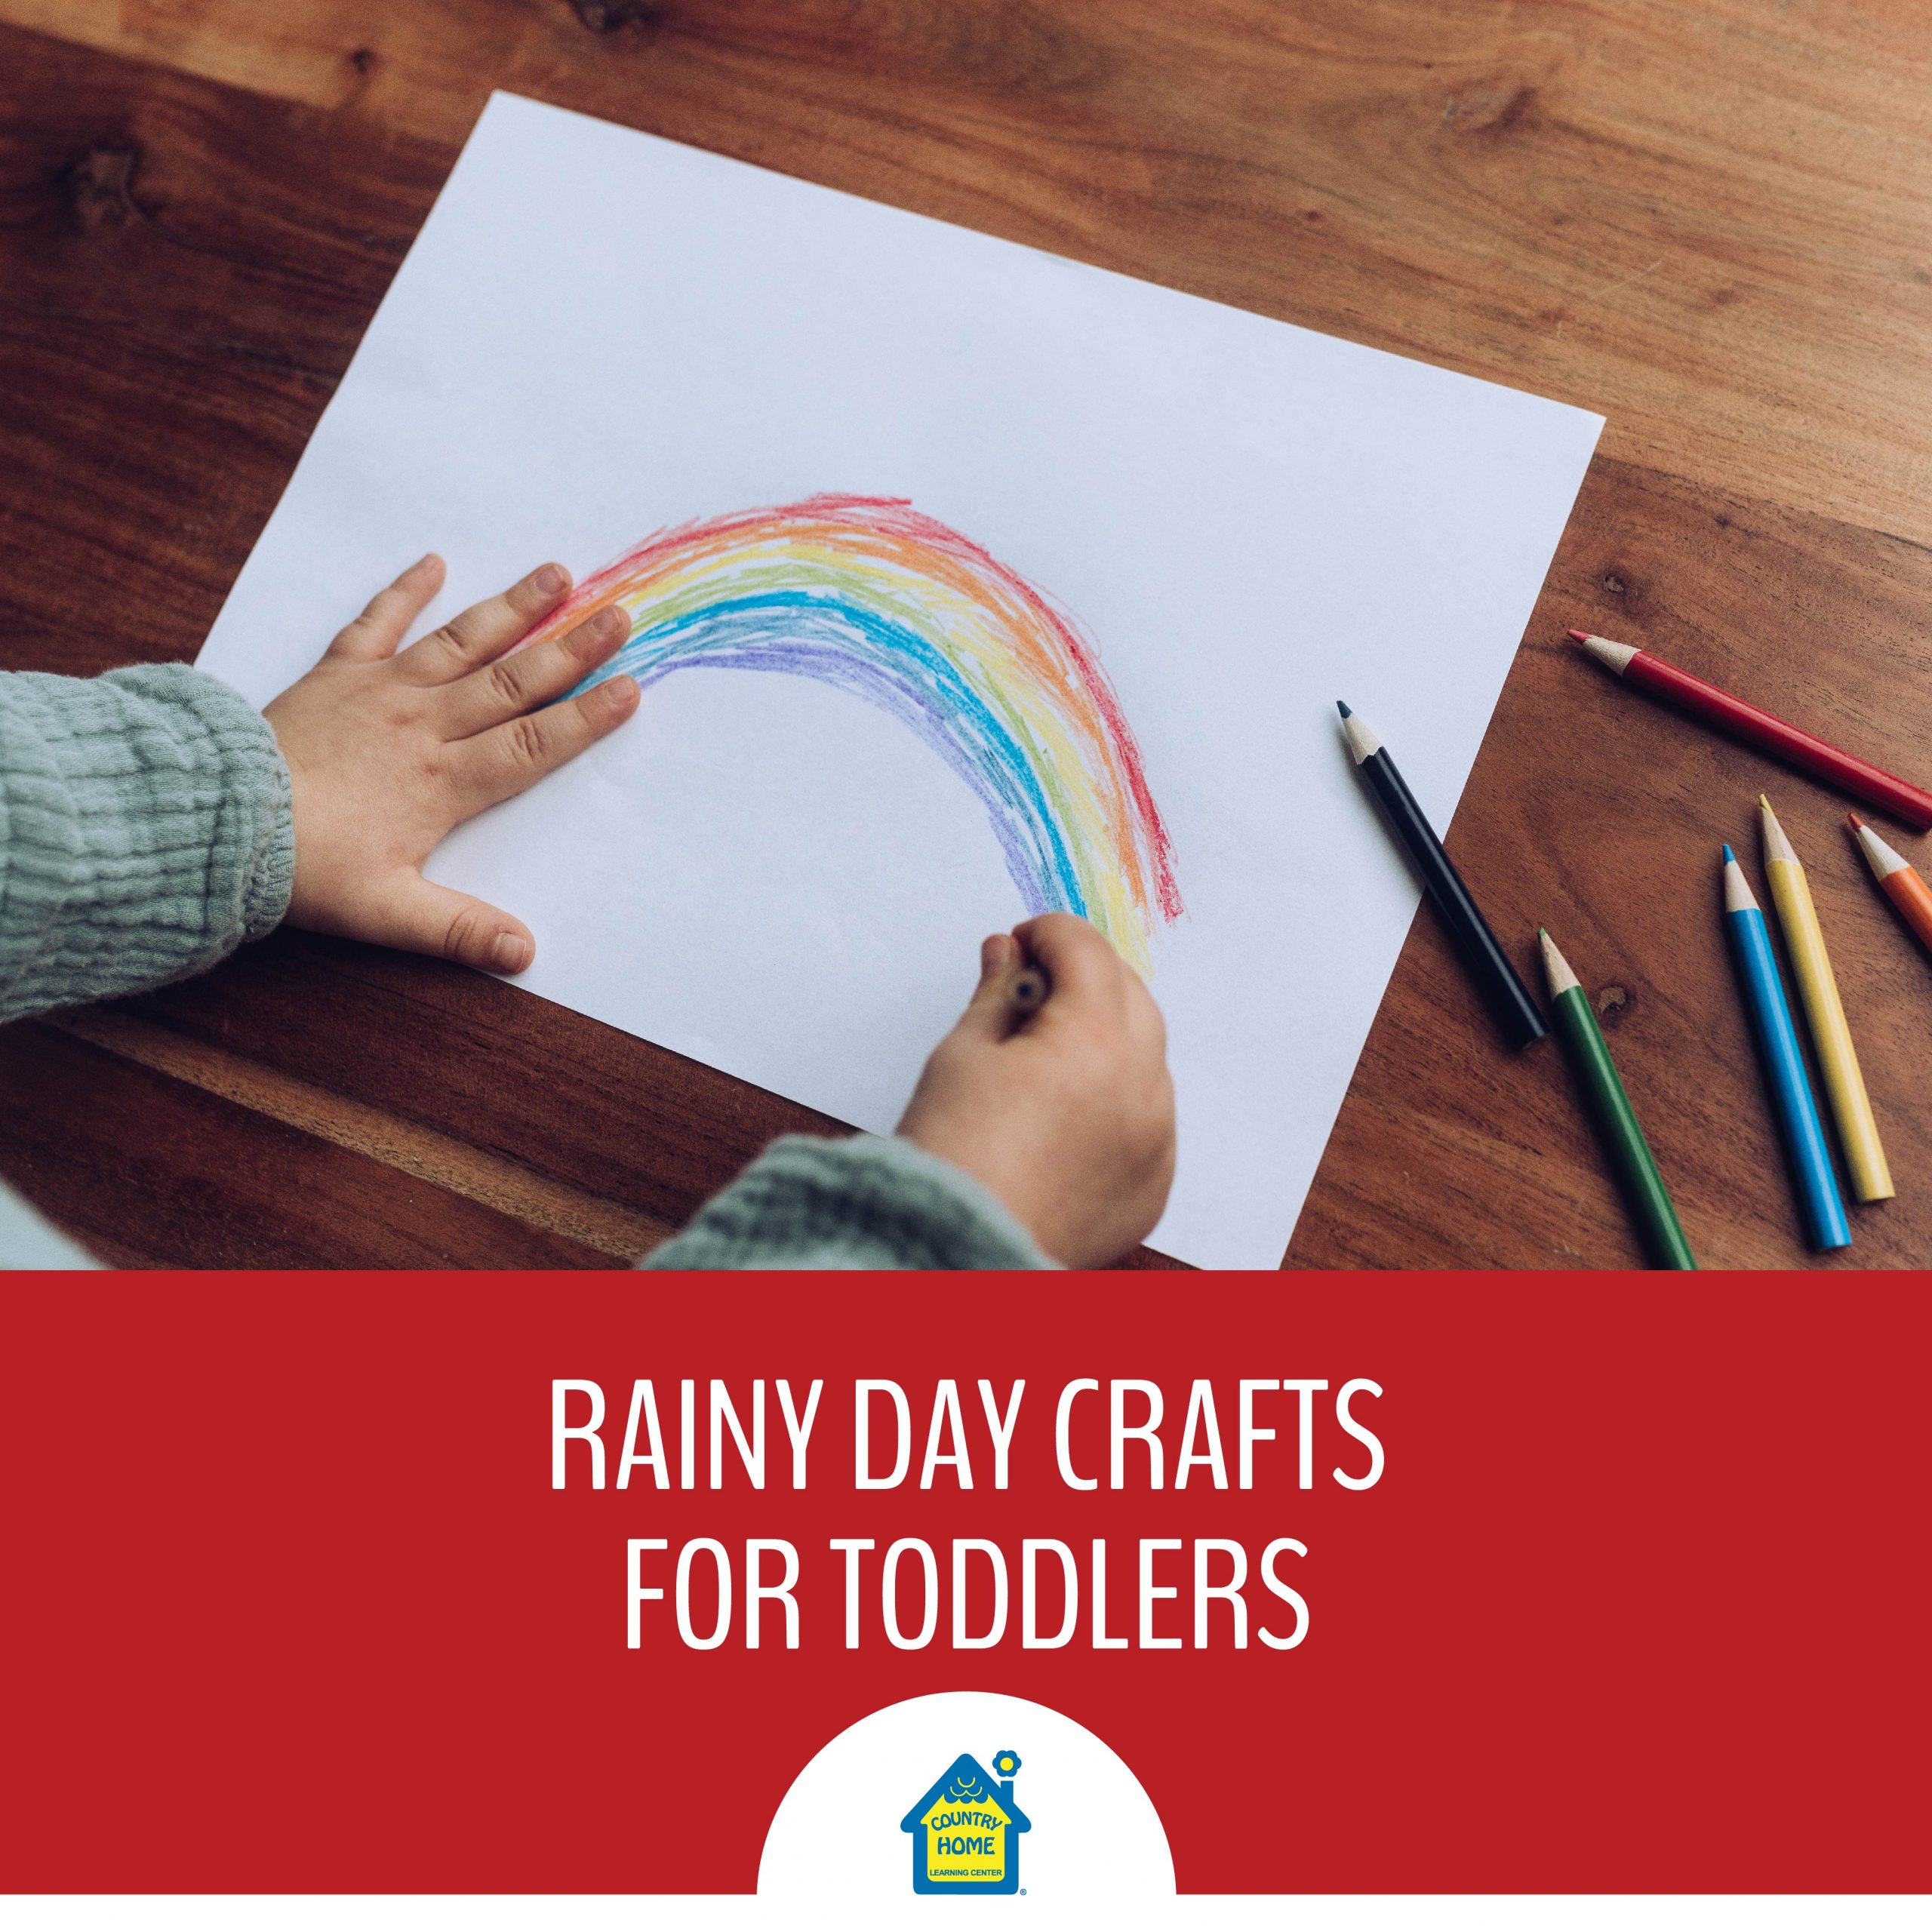 Rainy Day Crafts for Toddlers